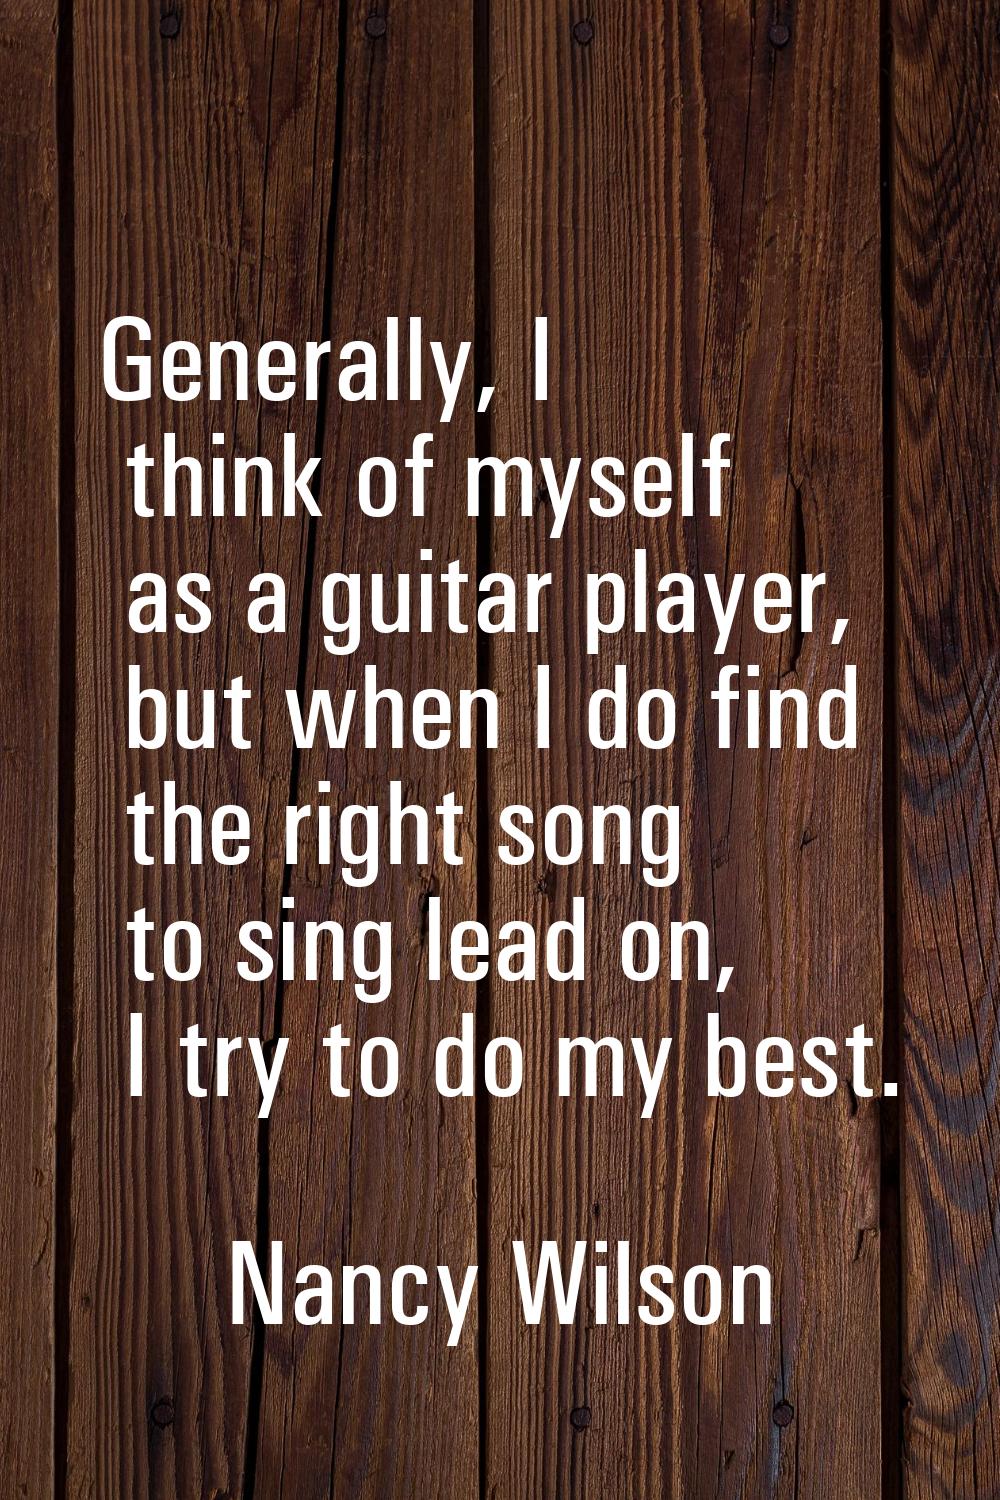 Generally, I think of myself as a guitar player, but when I do find the right song to sing lead on,